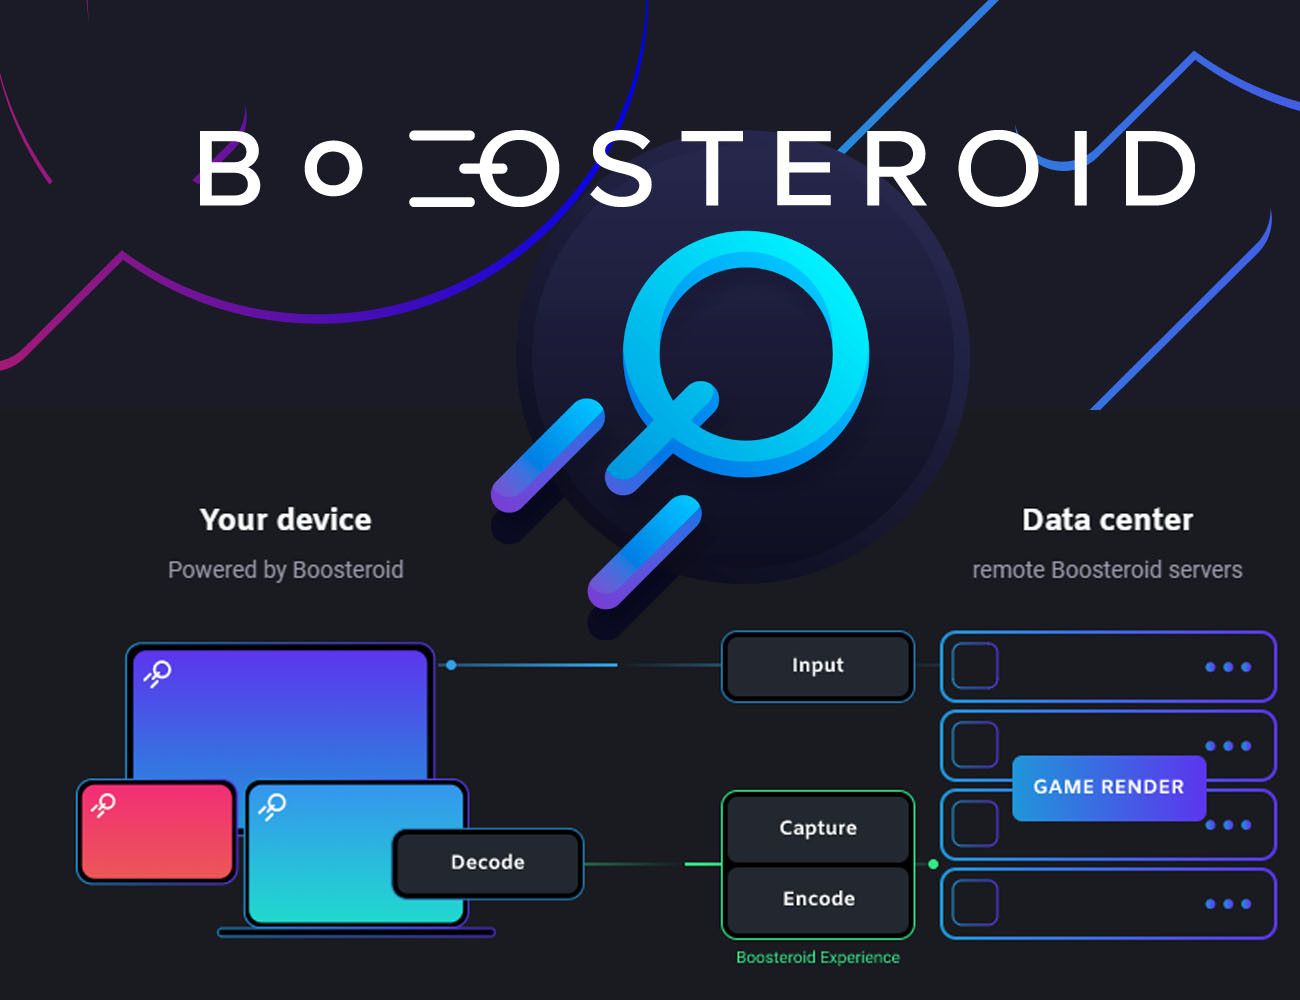 Download Boosteroid Cloud Gaming android on PC